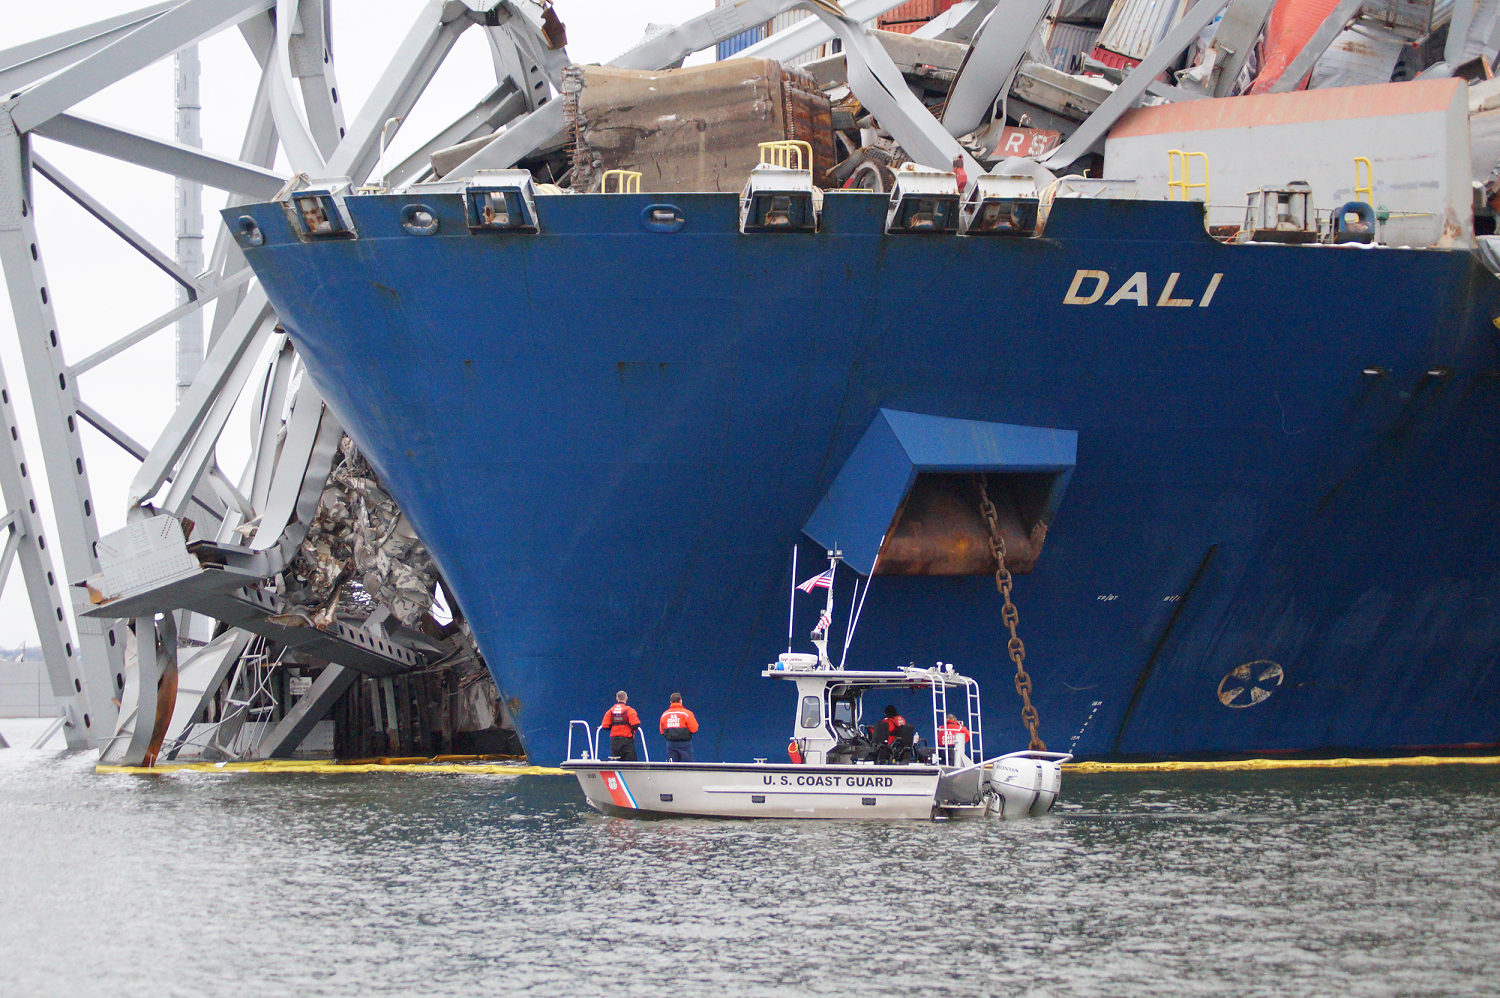 explosives to be used to help free dali from baltimore bridge wreckage